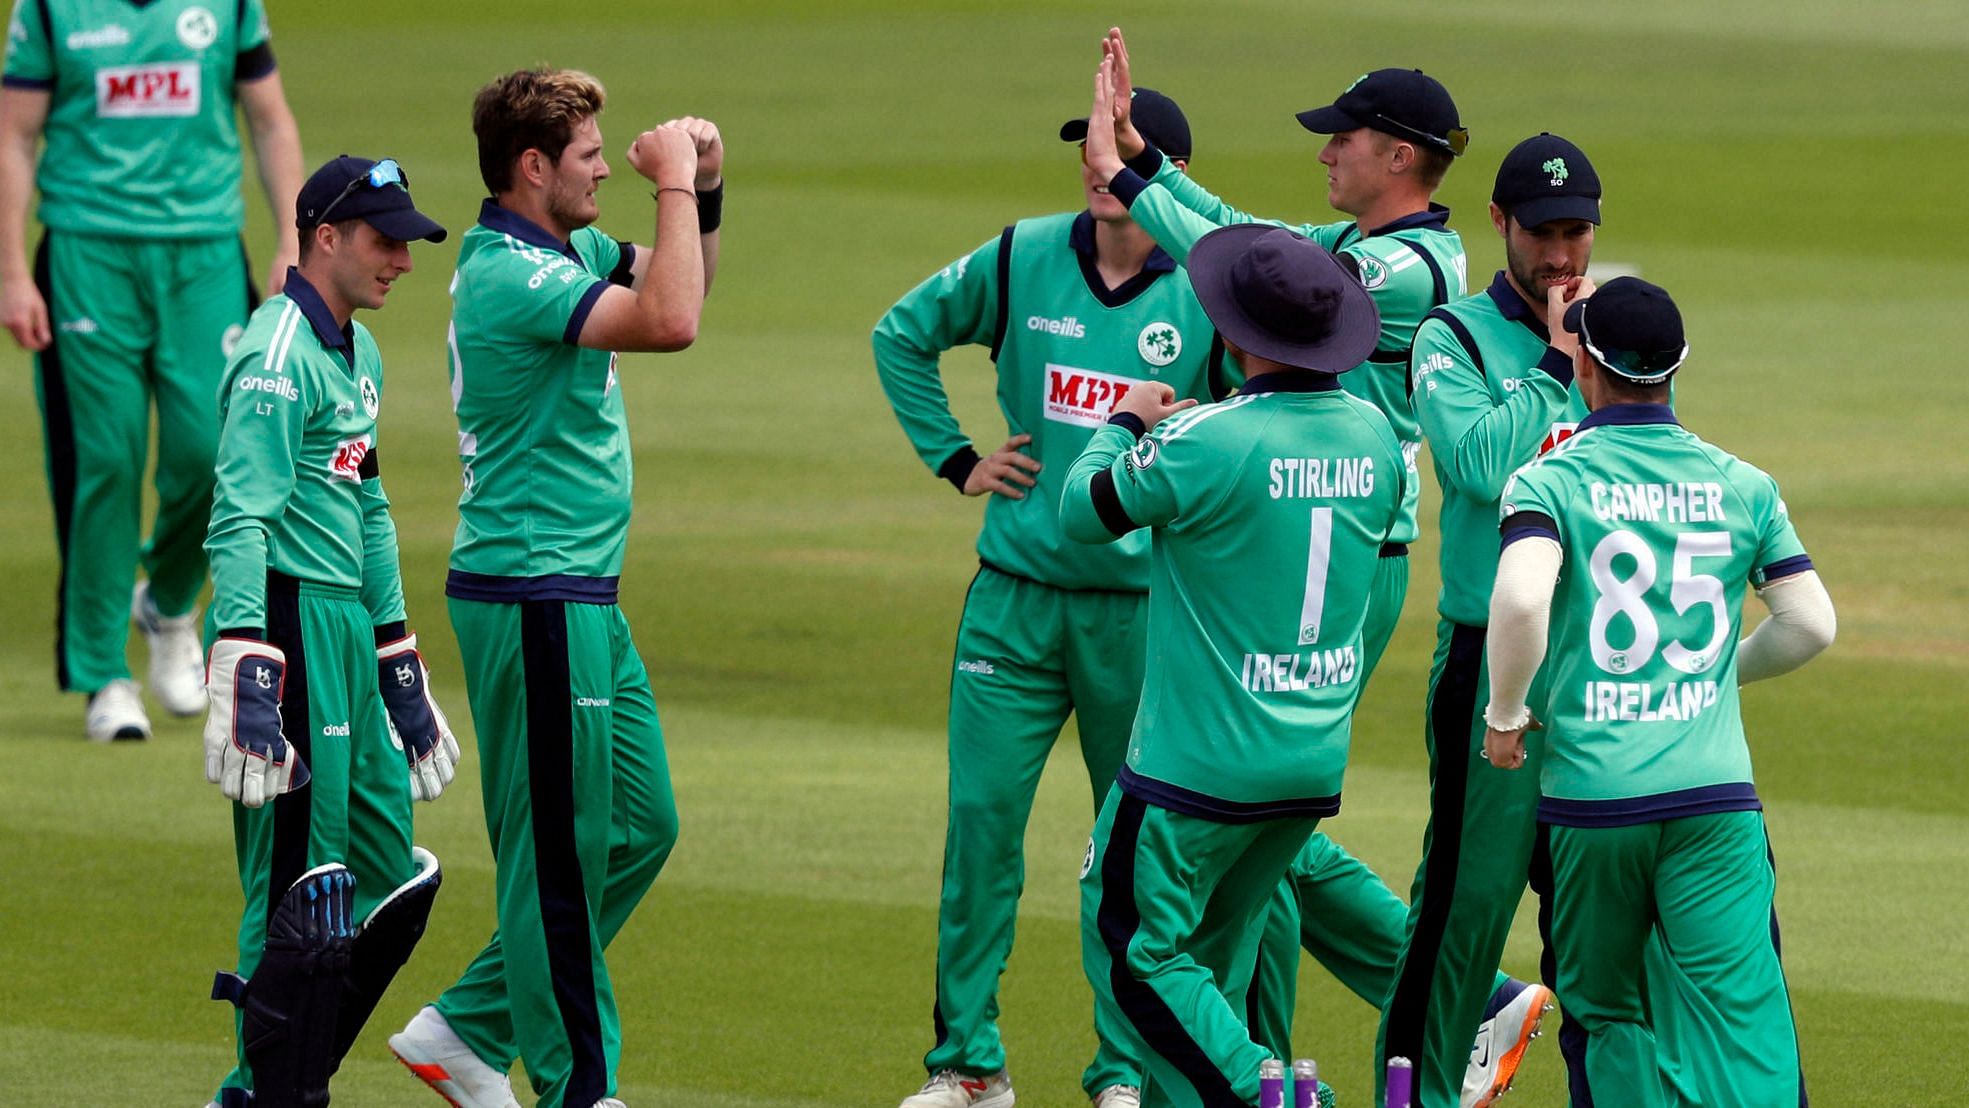 Ireland players celebrate a wicket during the 3-match ODI series against England.